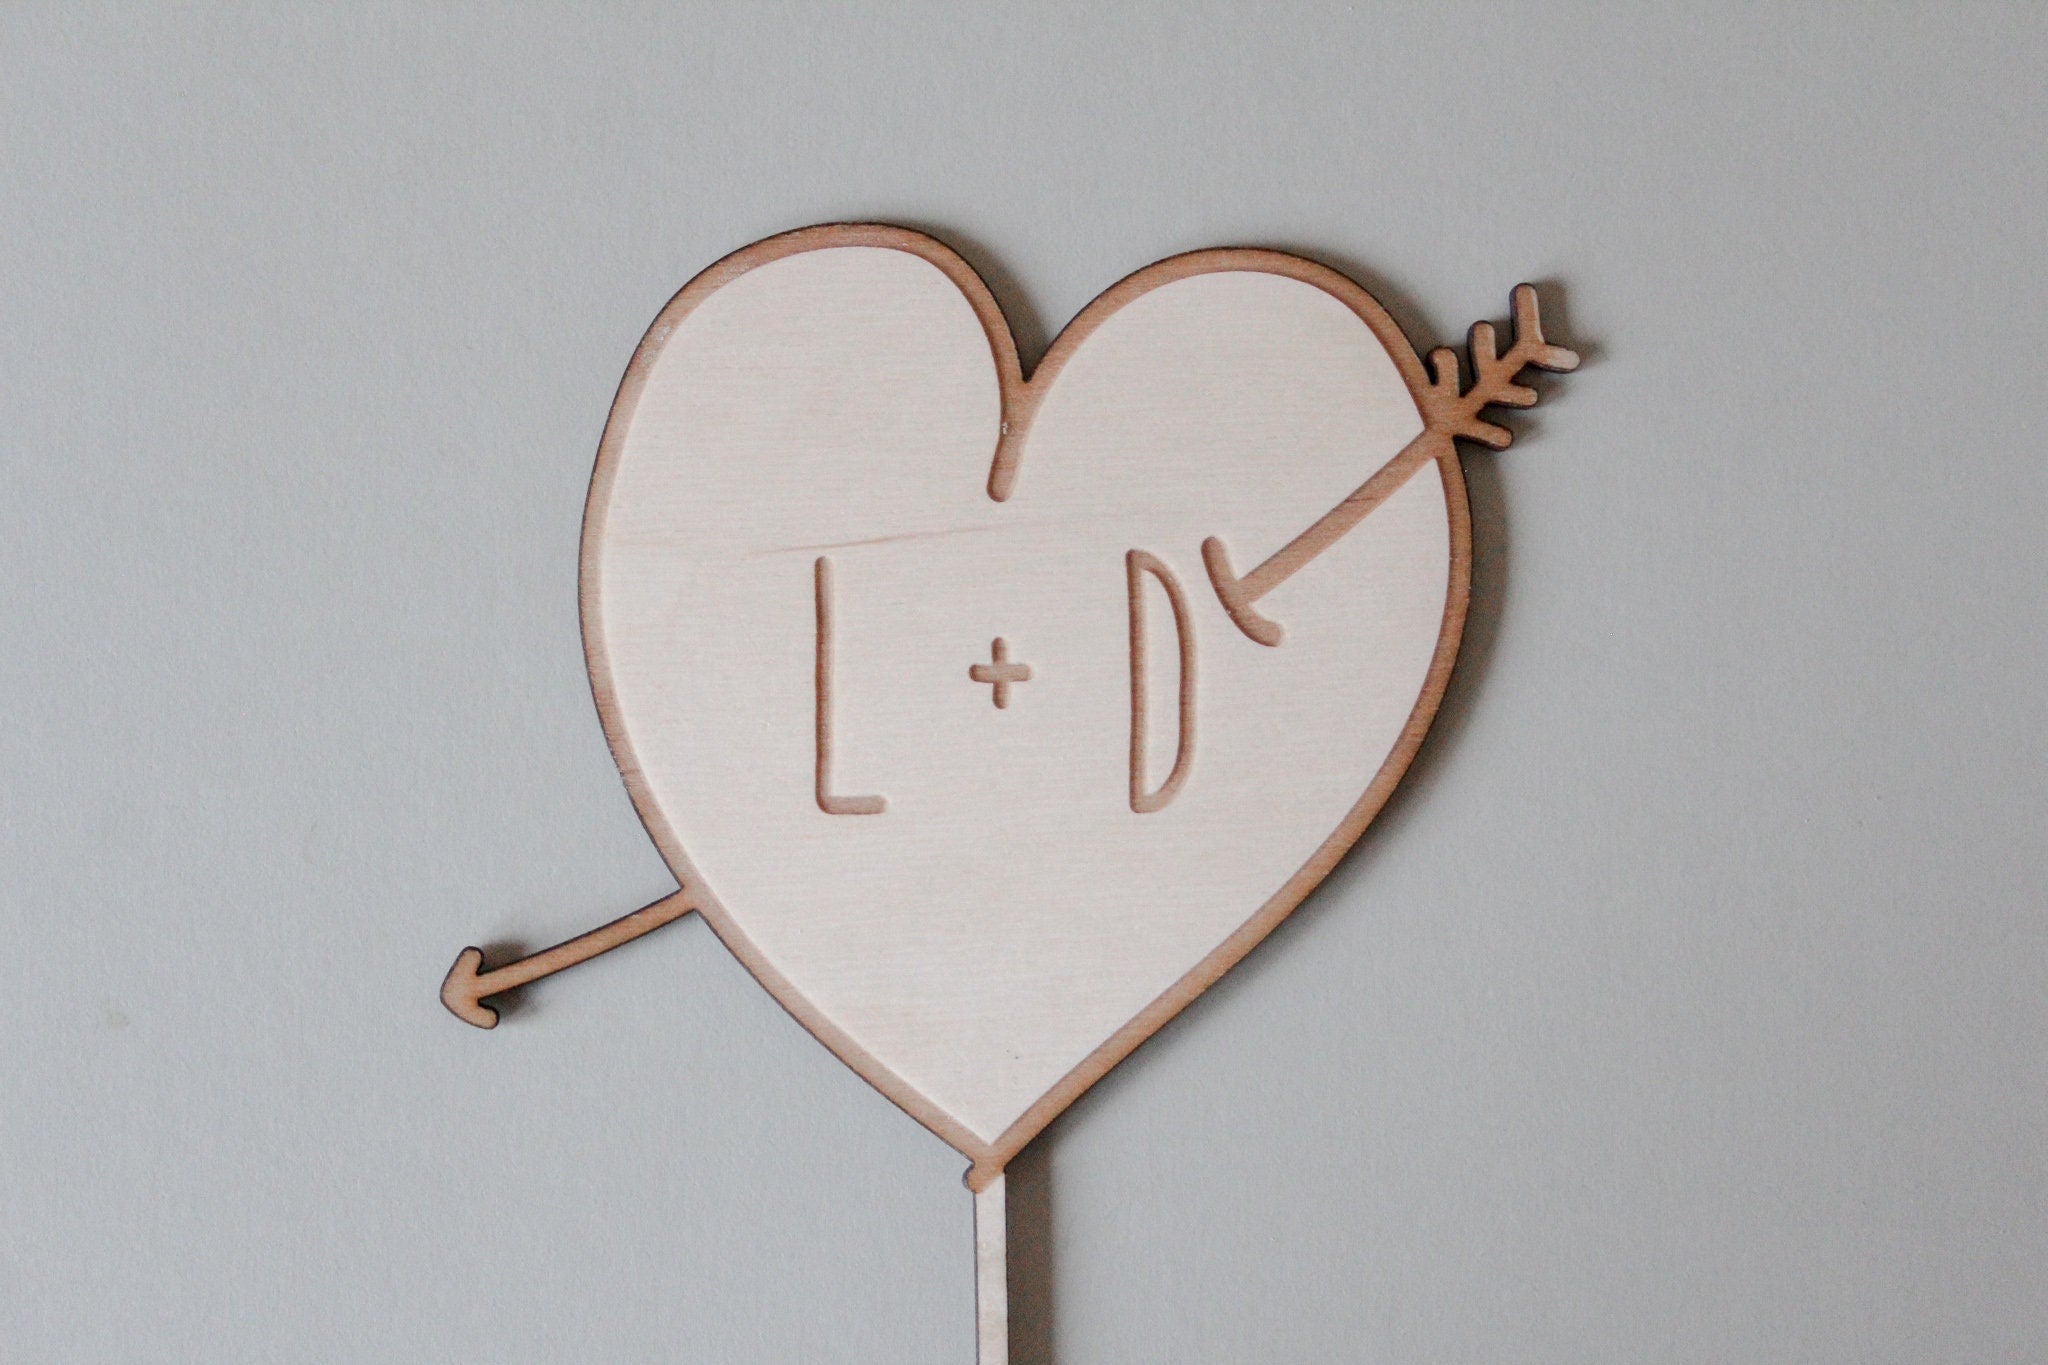 Heart Cake Topper With Initials, Heart Wedding Cake Topper